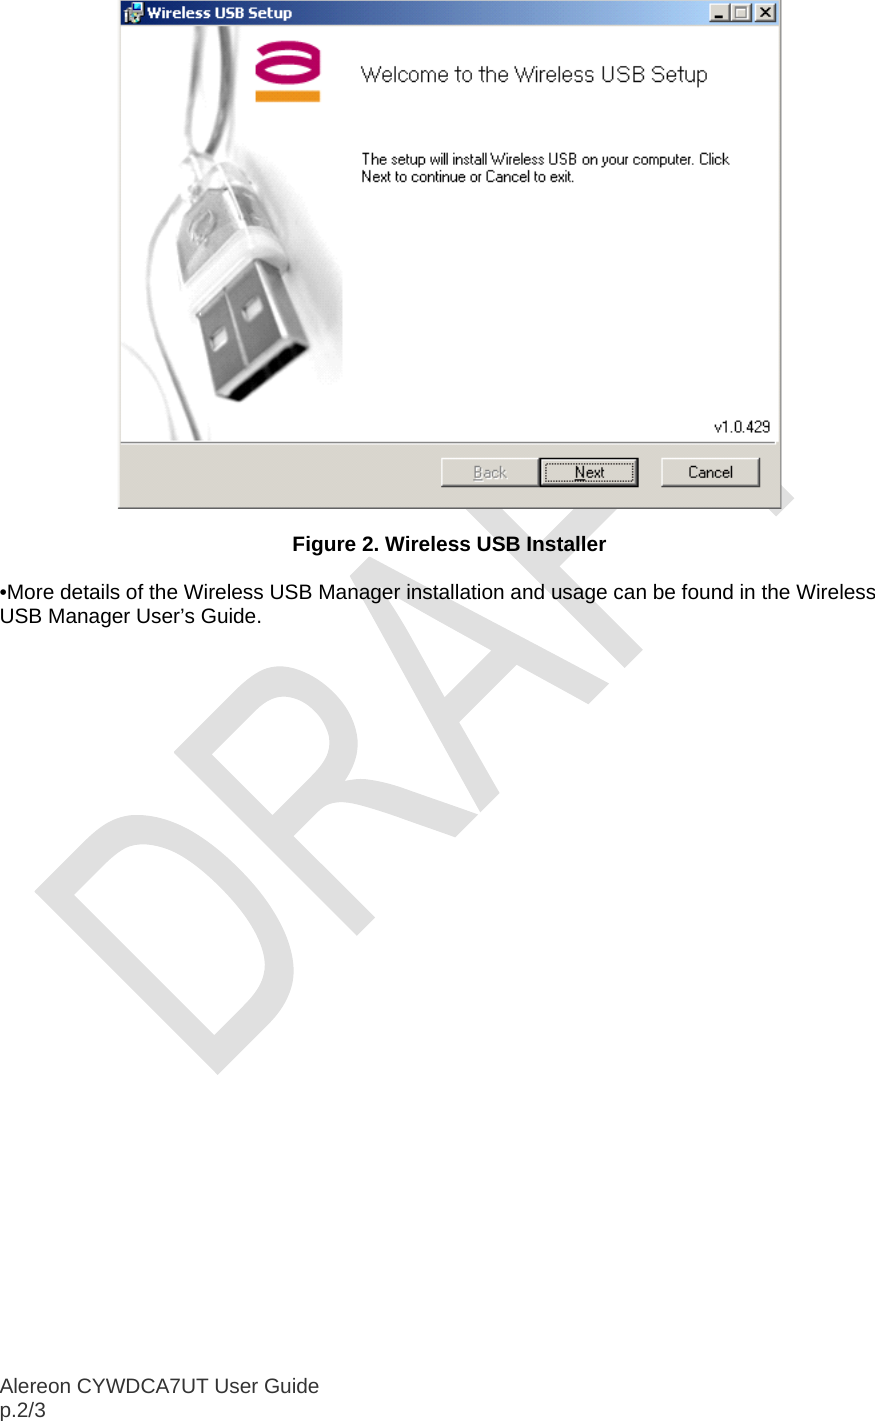  Alereon CYWDCA7UT User Guide                                                                                                    p.2/3   Figure 2. Wireless USB Installer  •More details of the Wireless USB Manager installation and usage can be found in the Wireless USB Manager User’s Guide.  